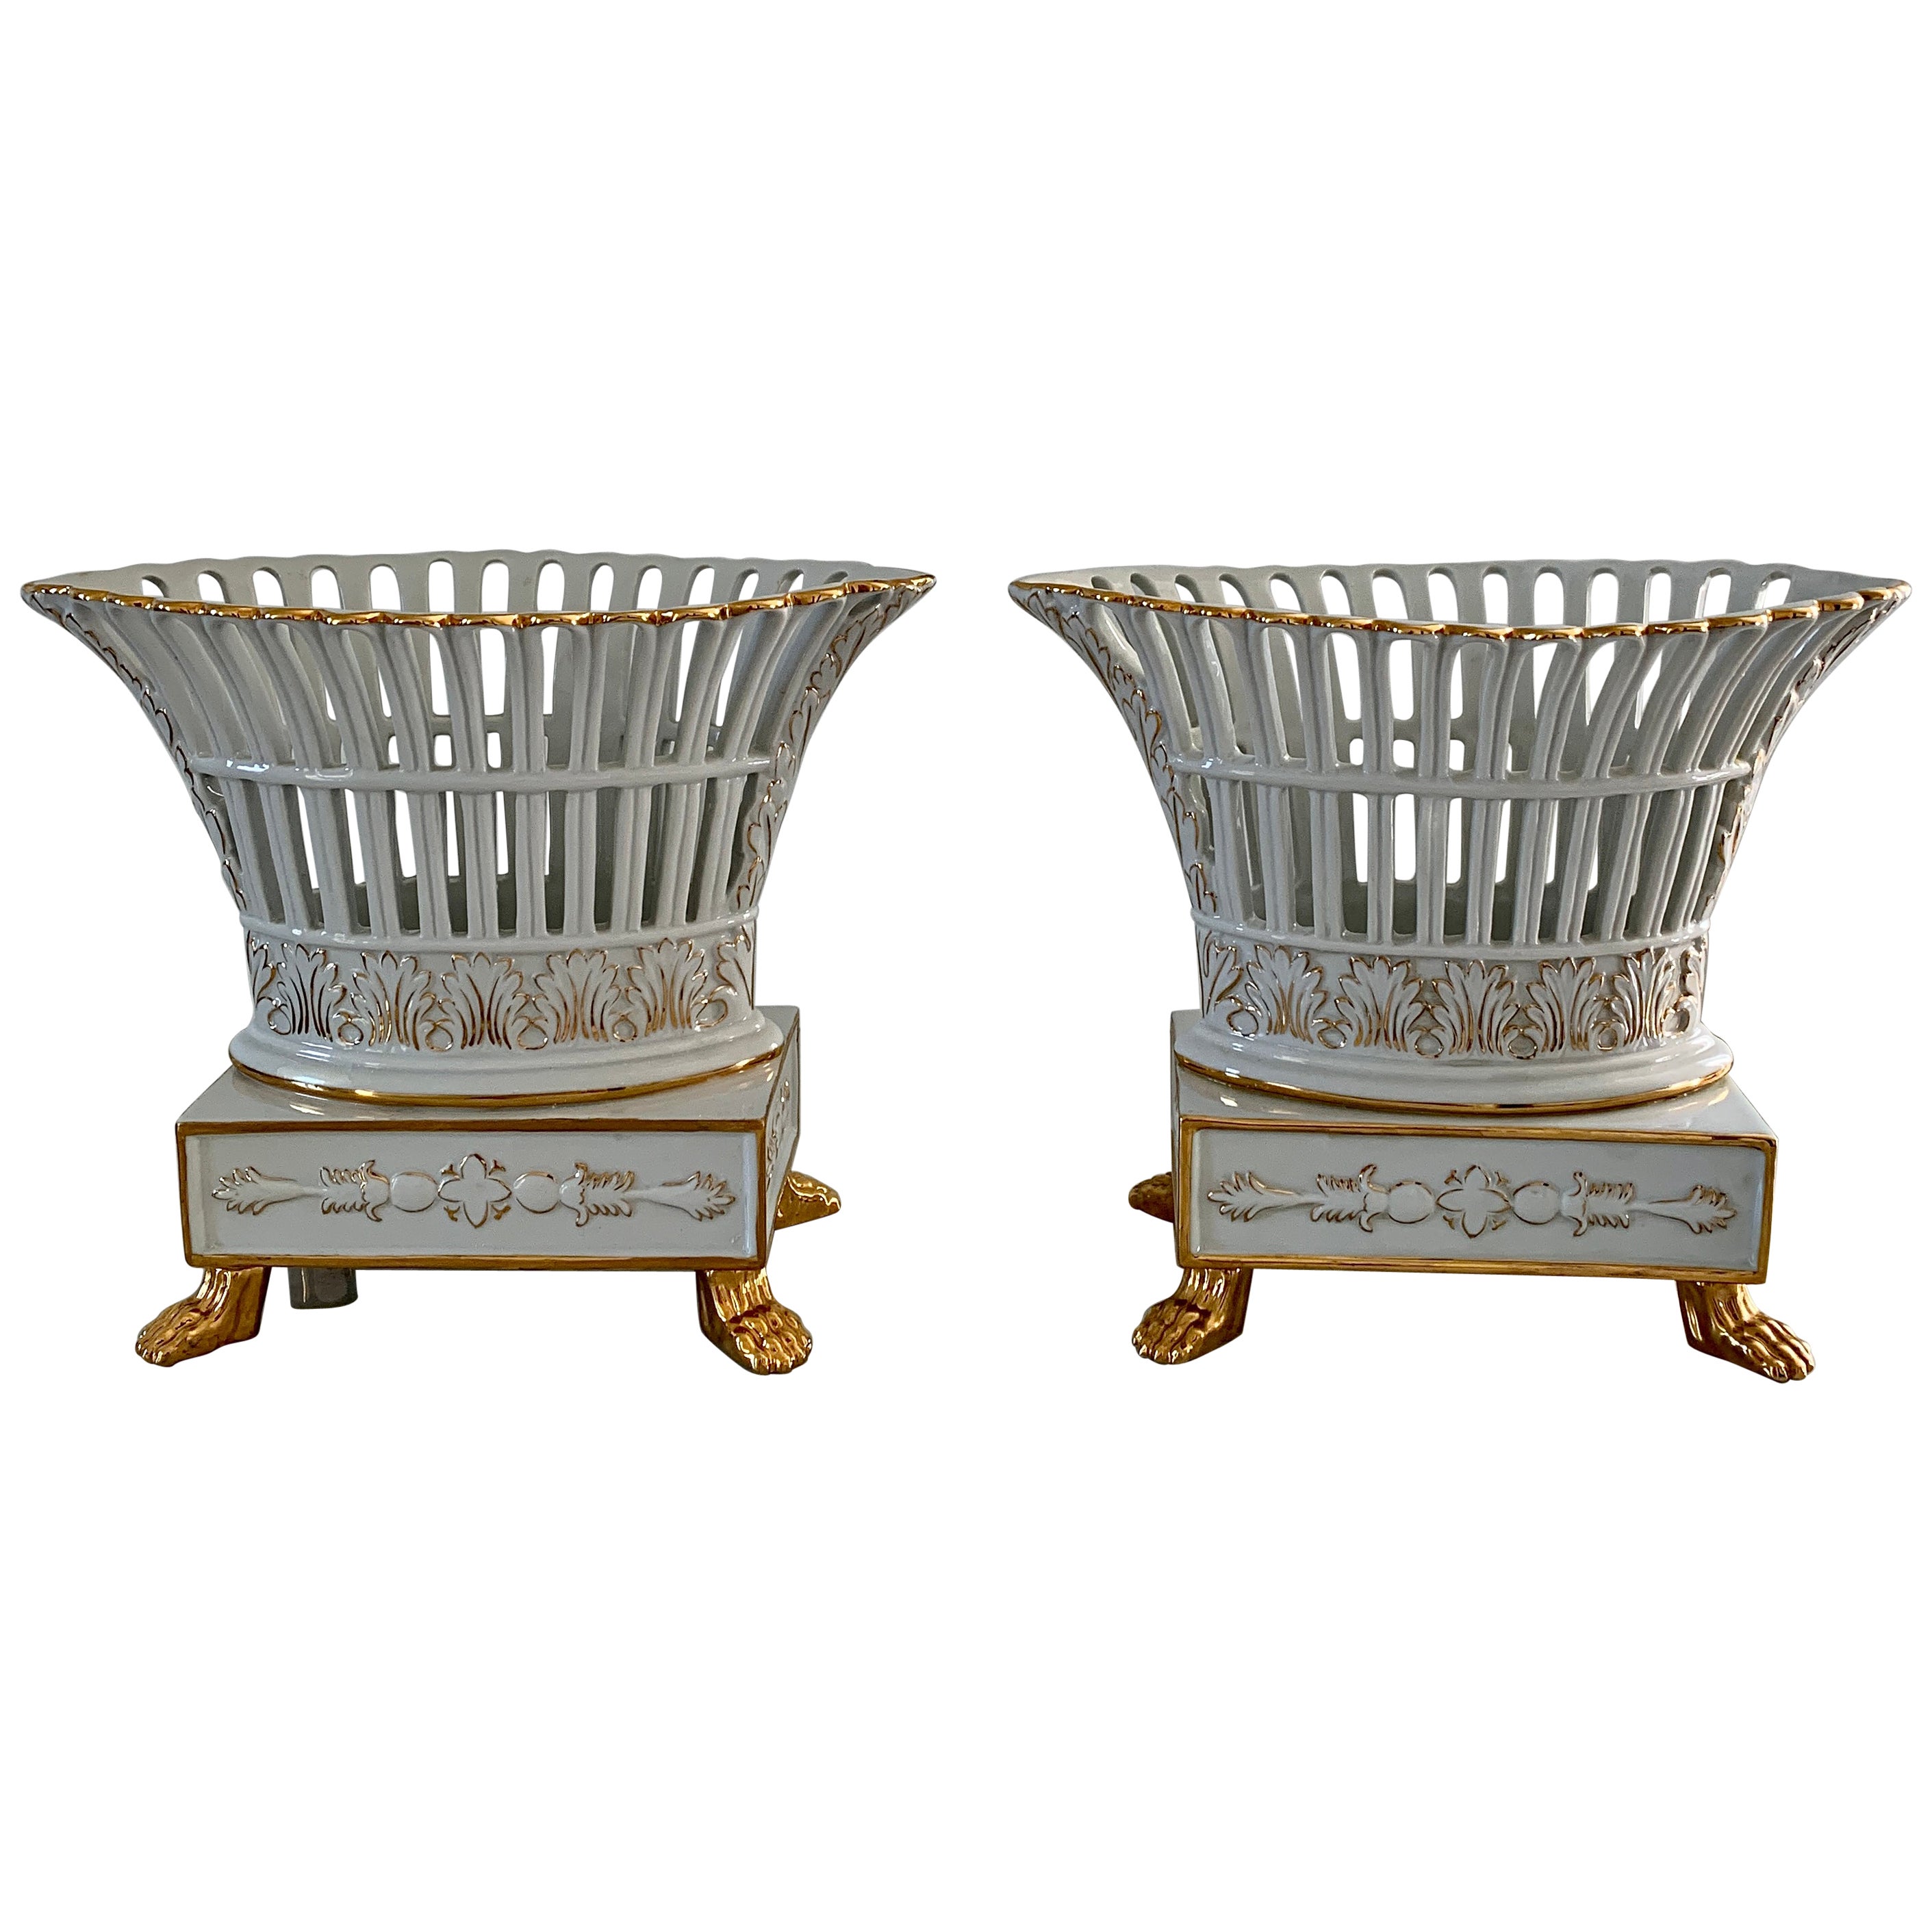 Neoclassical Regency Reticulated Gold Gilt Porcelain Basket Compotes, Pair